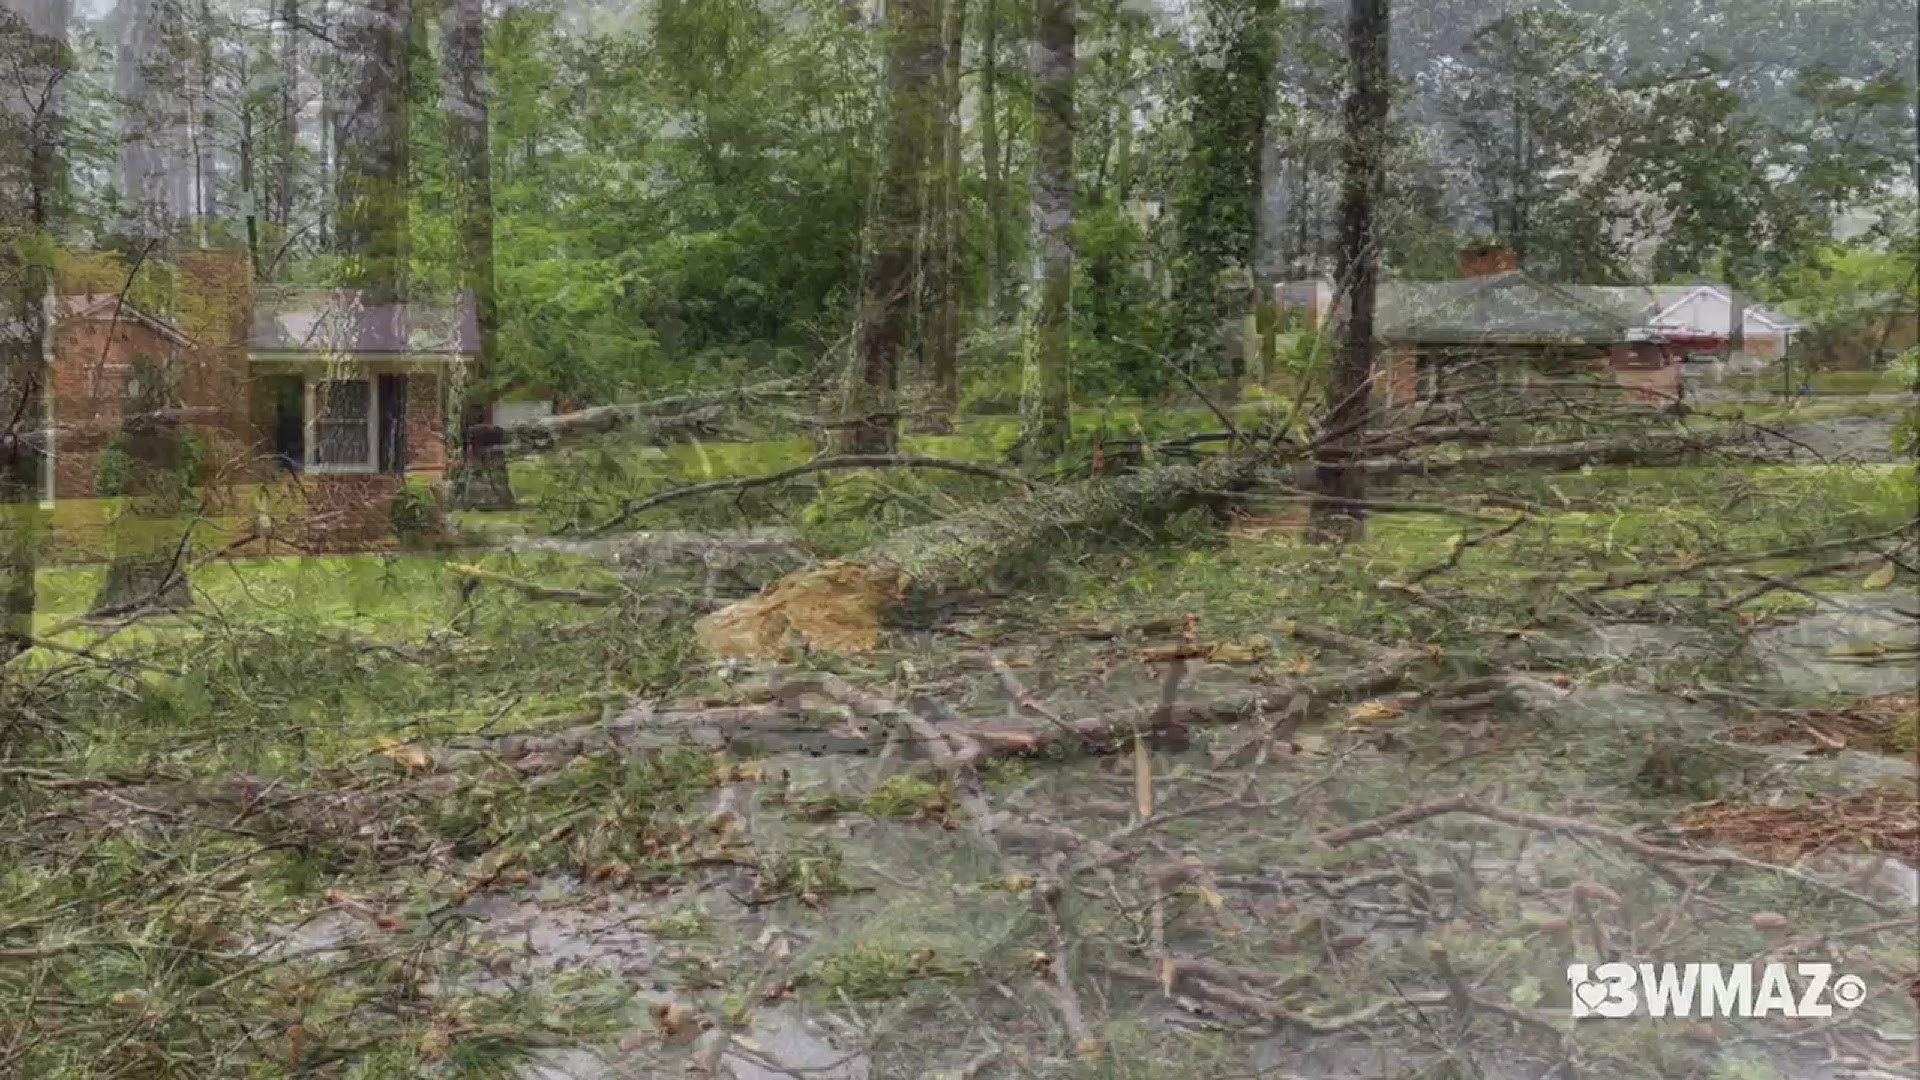 Storms that moved through Sunday caused damage to Pine Level Drive in Hawkinsville in Pulaski County. Video from Jennifer Bryant.